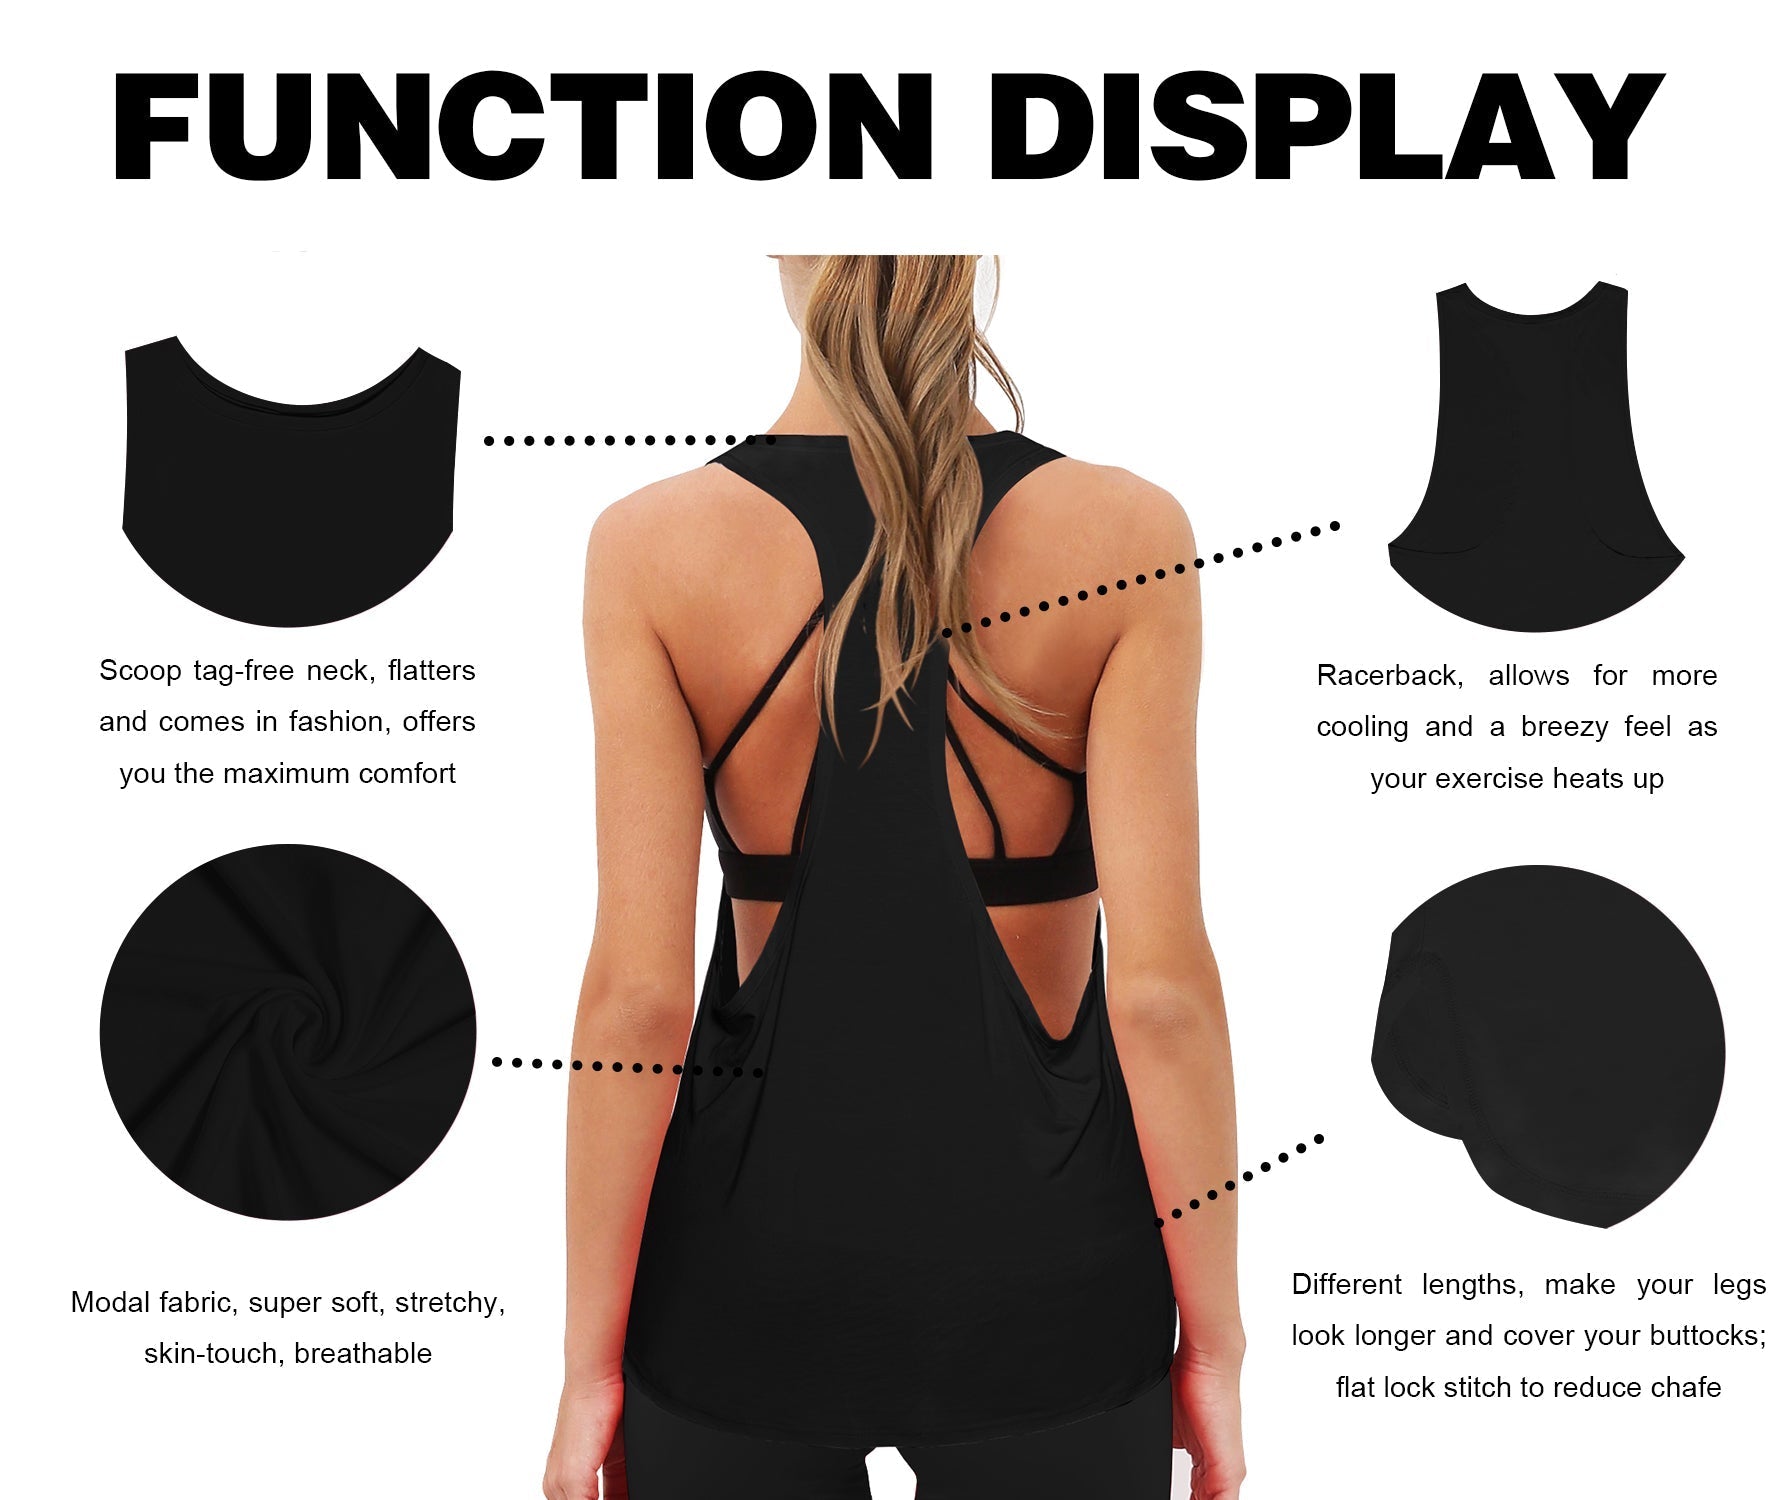 Low Cut Loose Fit Tank Top black Designed for On the Move Loose fit 93%Modal/7%Spandex Four-way stretch Naturally breathable Super-Soft, Modal Fabric